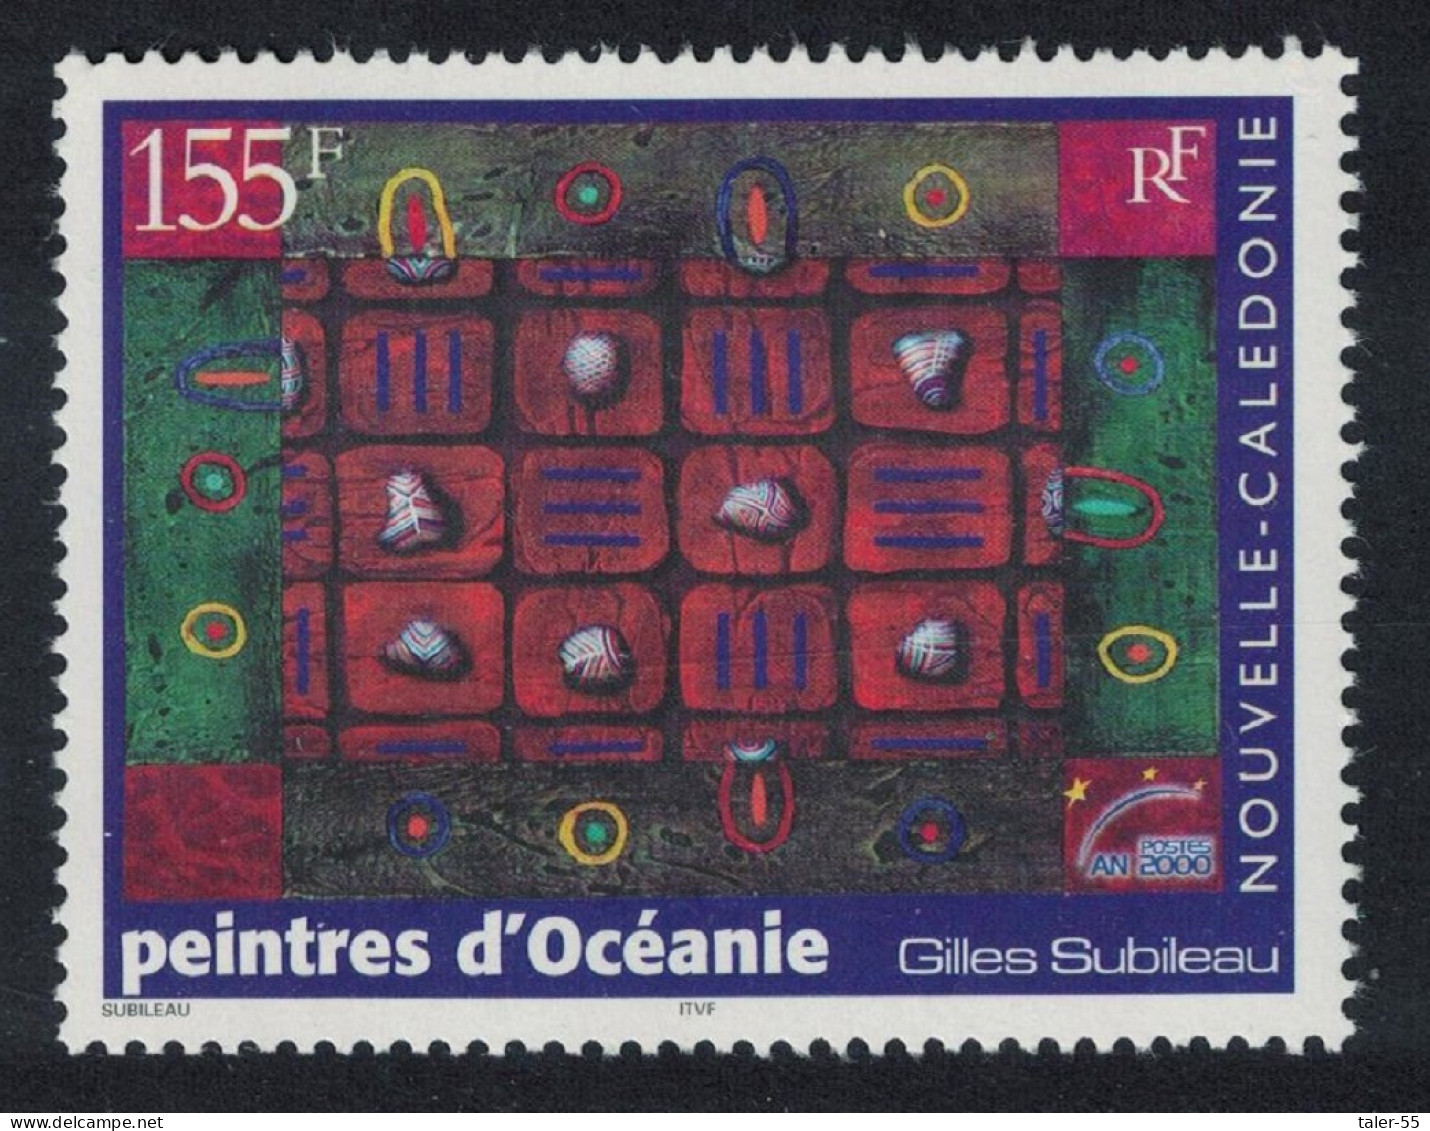 New Caledonia 'Painted Shells' By Gilles Subileau Pacific Painters 2000 MNH SG#1199 - Ongebruikt